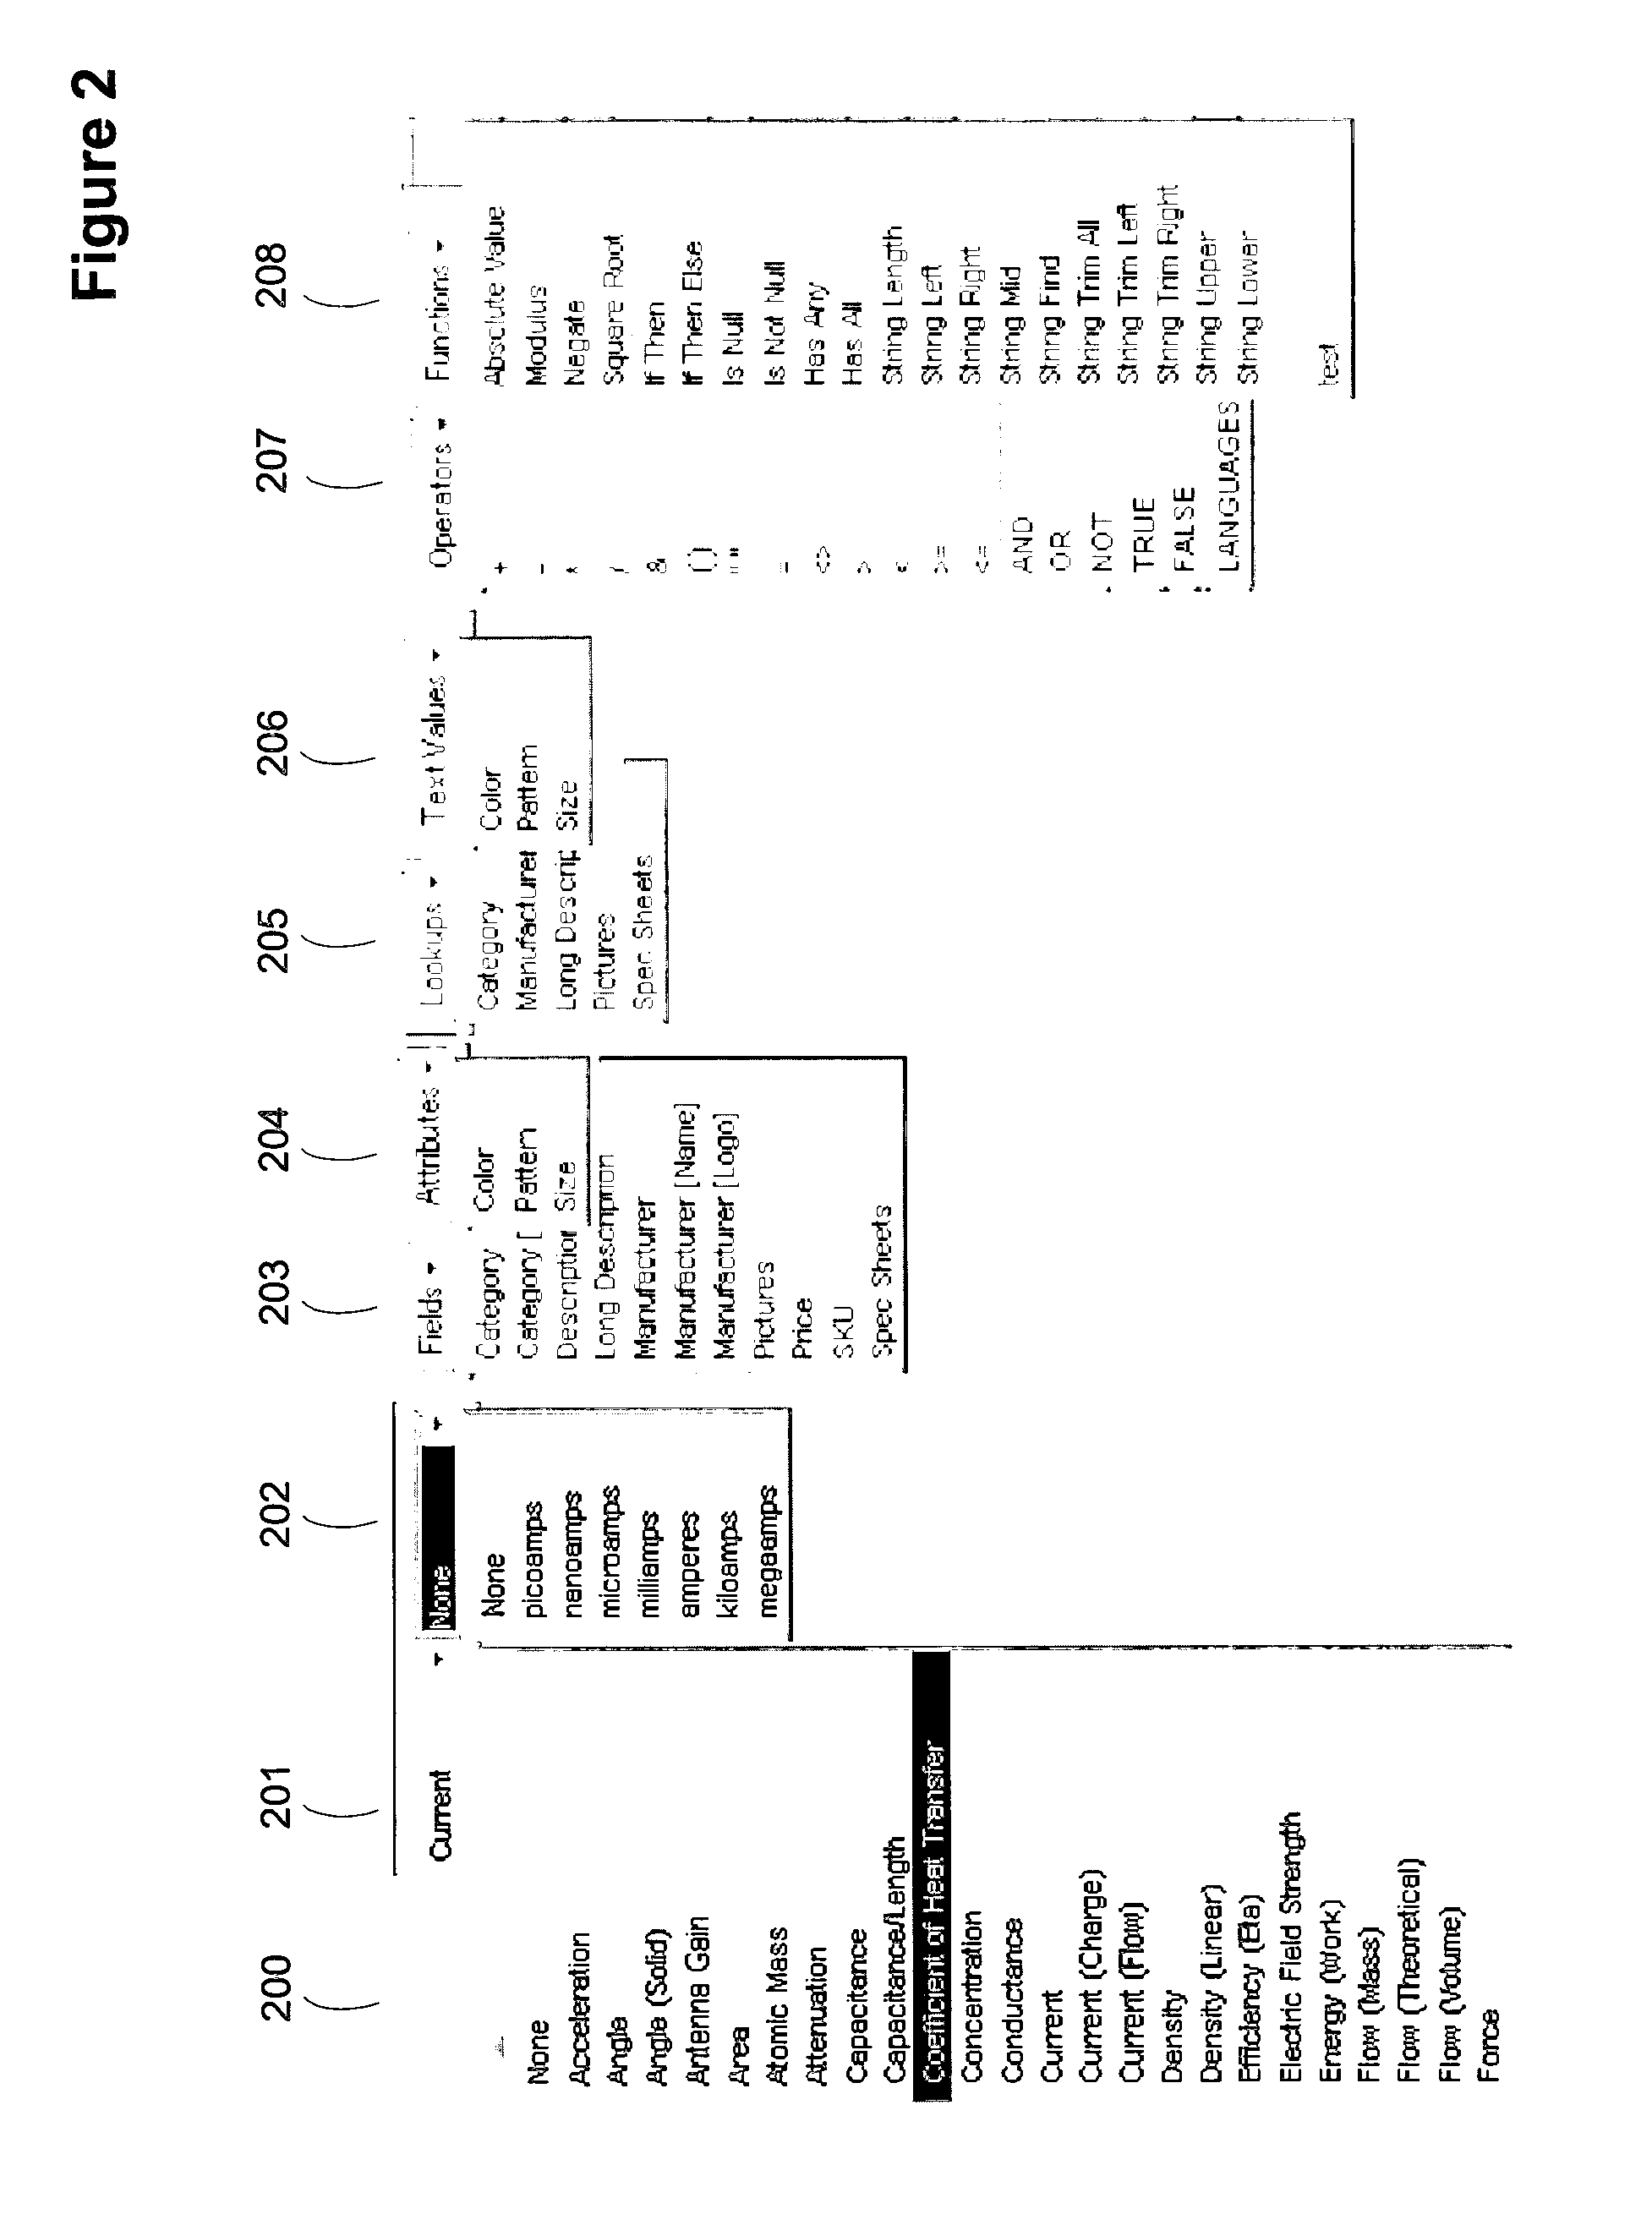 Method for conditionally branching a validation